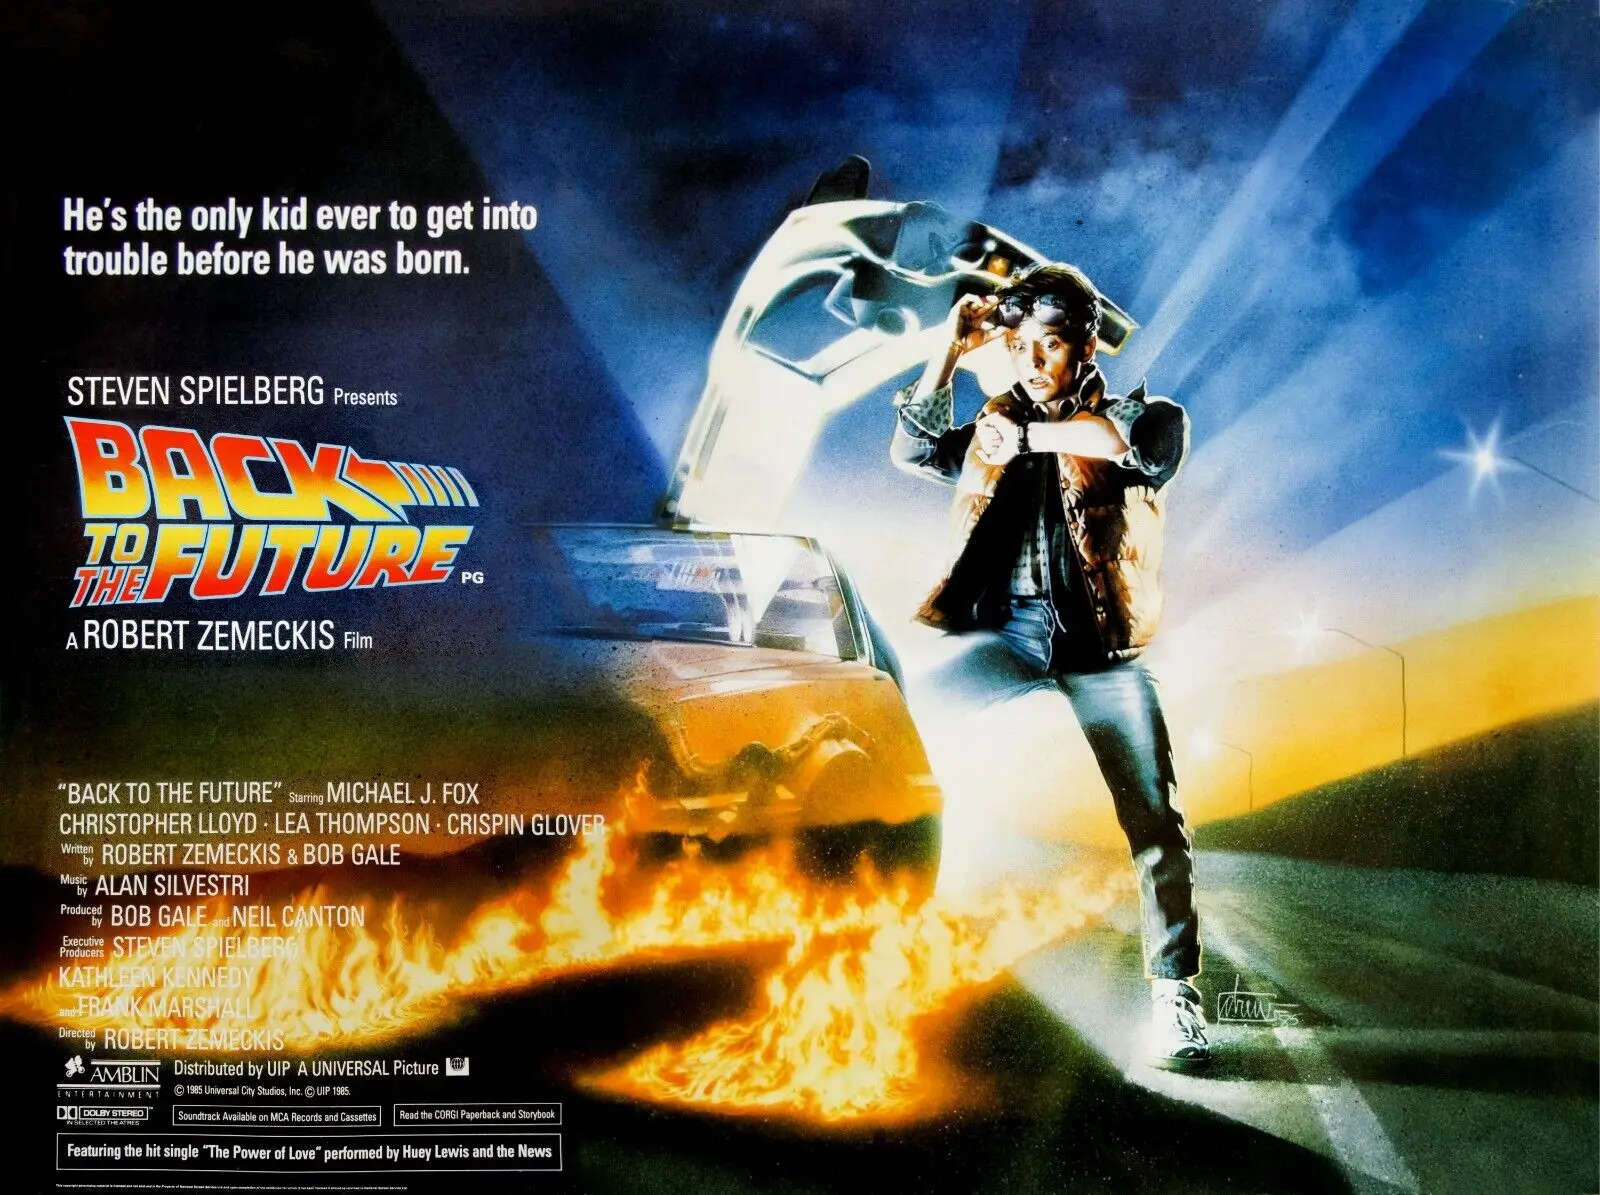 

BACK TO THE FUTURE Movie Poster Canvas Painting Wall Art Prints Picture for Living Room Home Decor